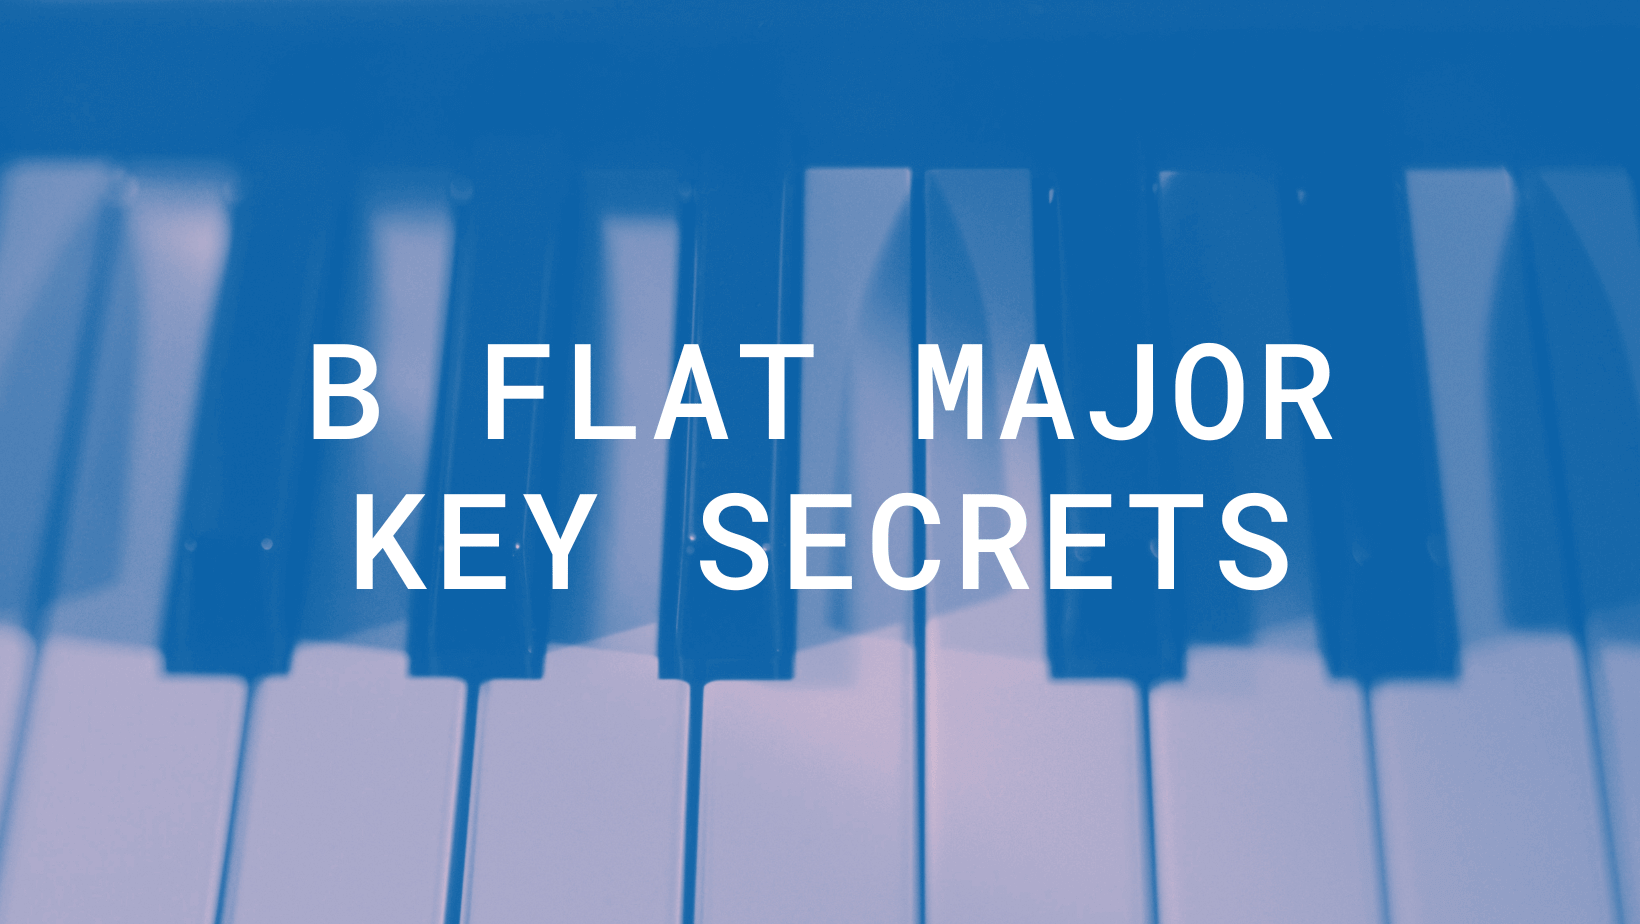 B Flat Major: The Key to Creating Emotional and Uplifting Music